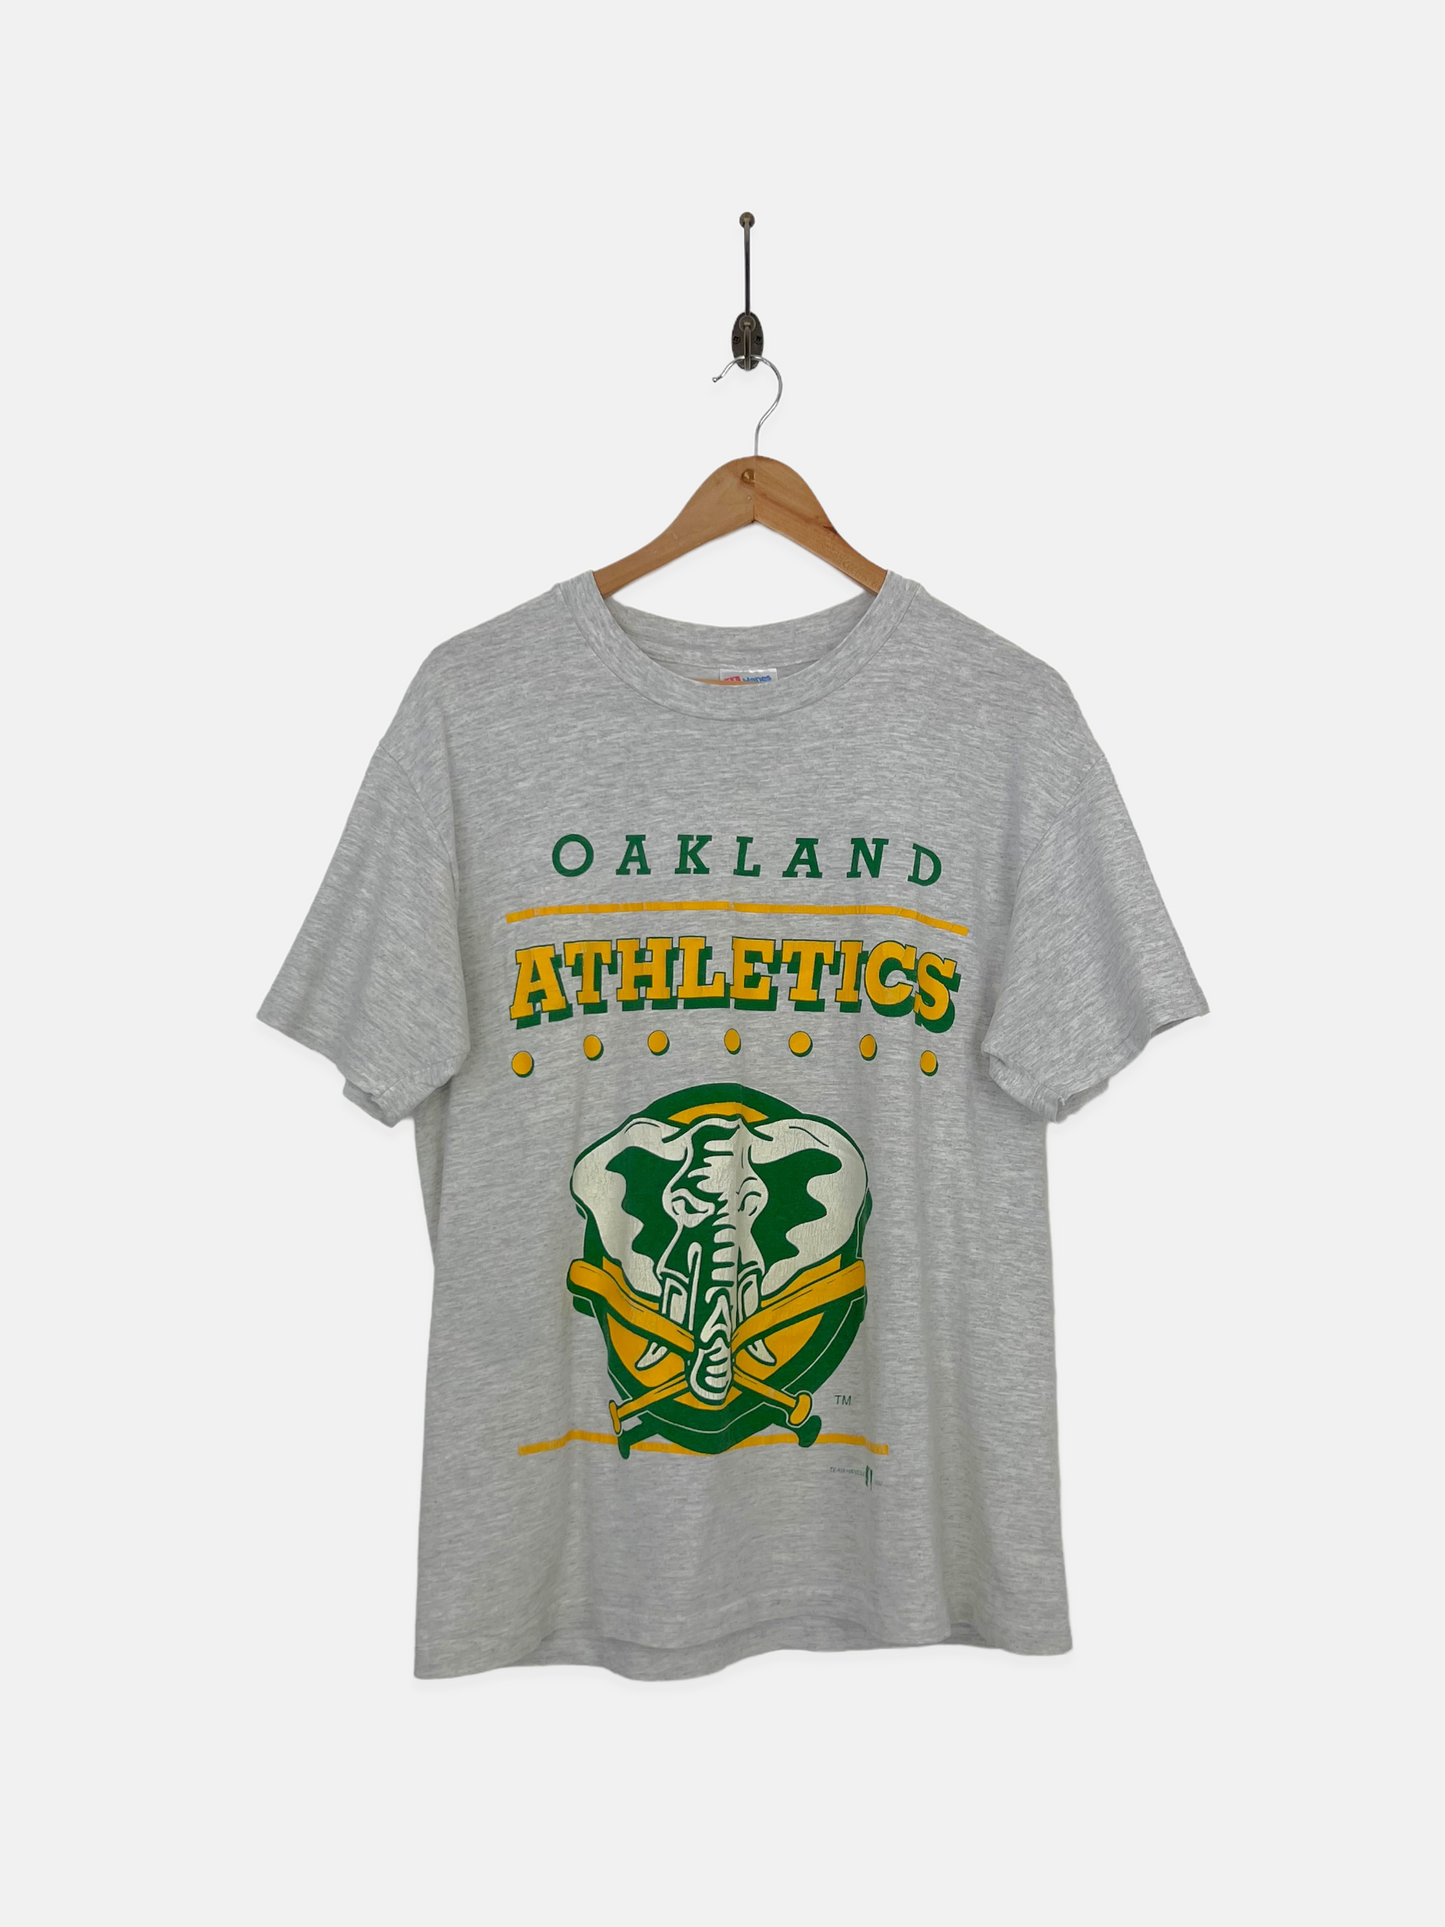 Vintage MLB Oakland Athletics Tee Shirt 1992 Size XL Made in USA